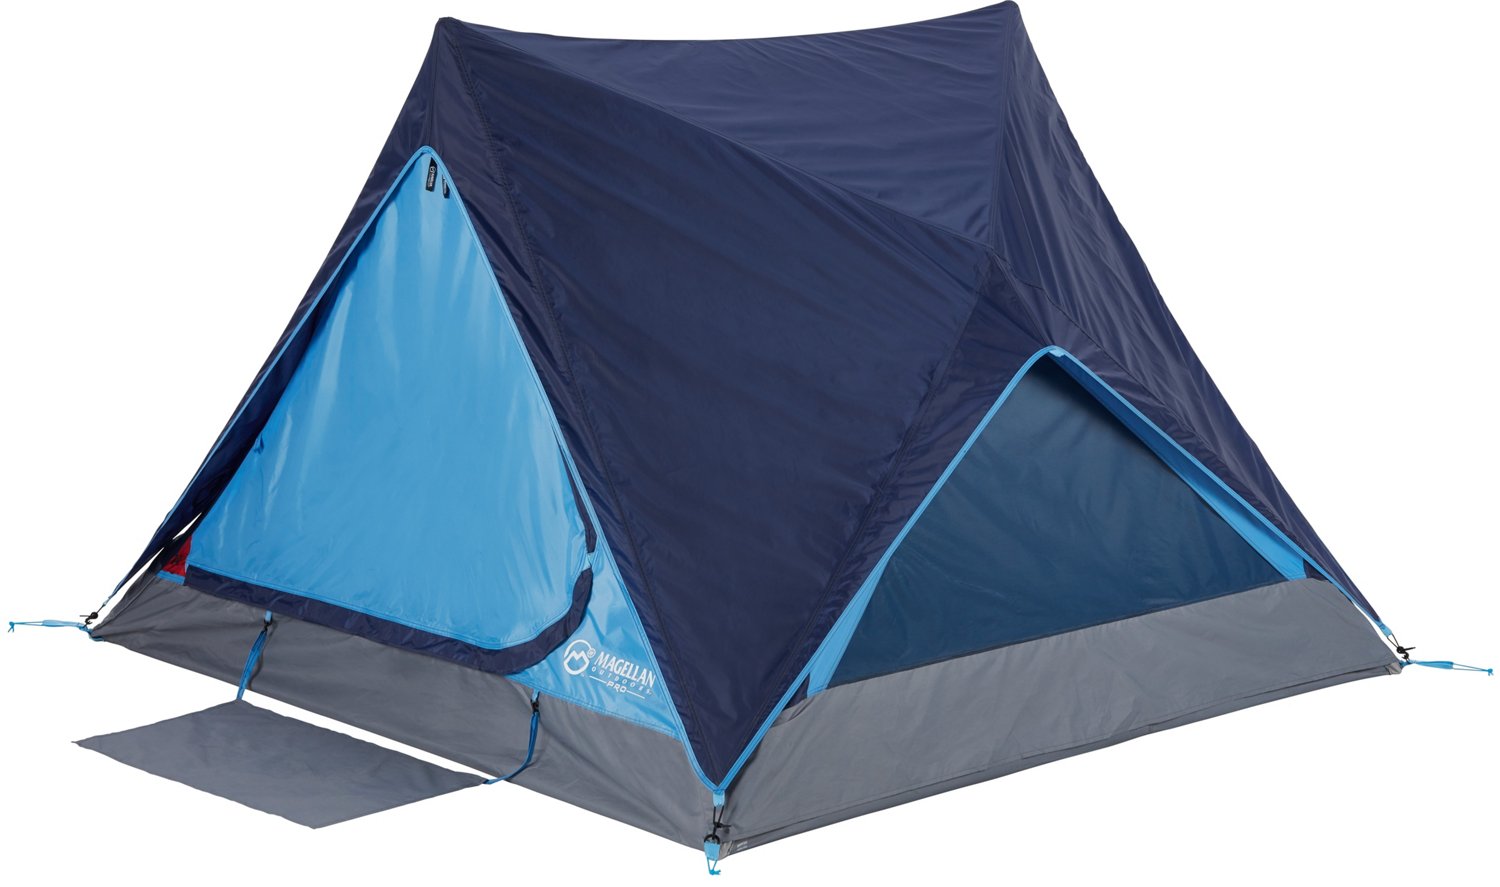 Magellan Outdoors Pro SwiftRise 3-Person Hub Tent